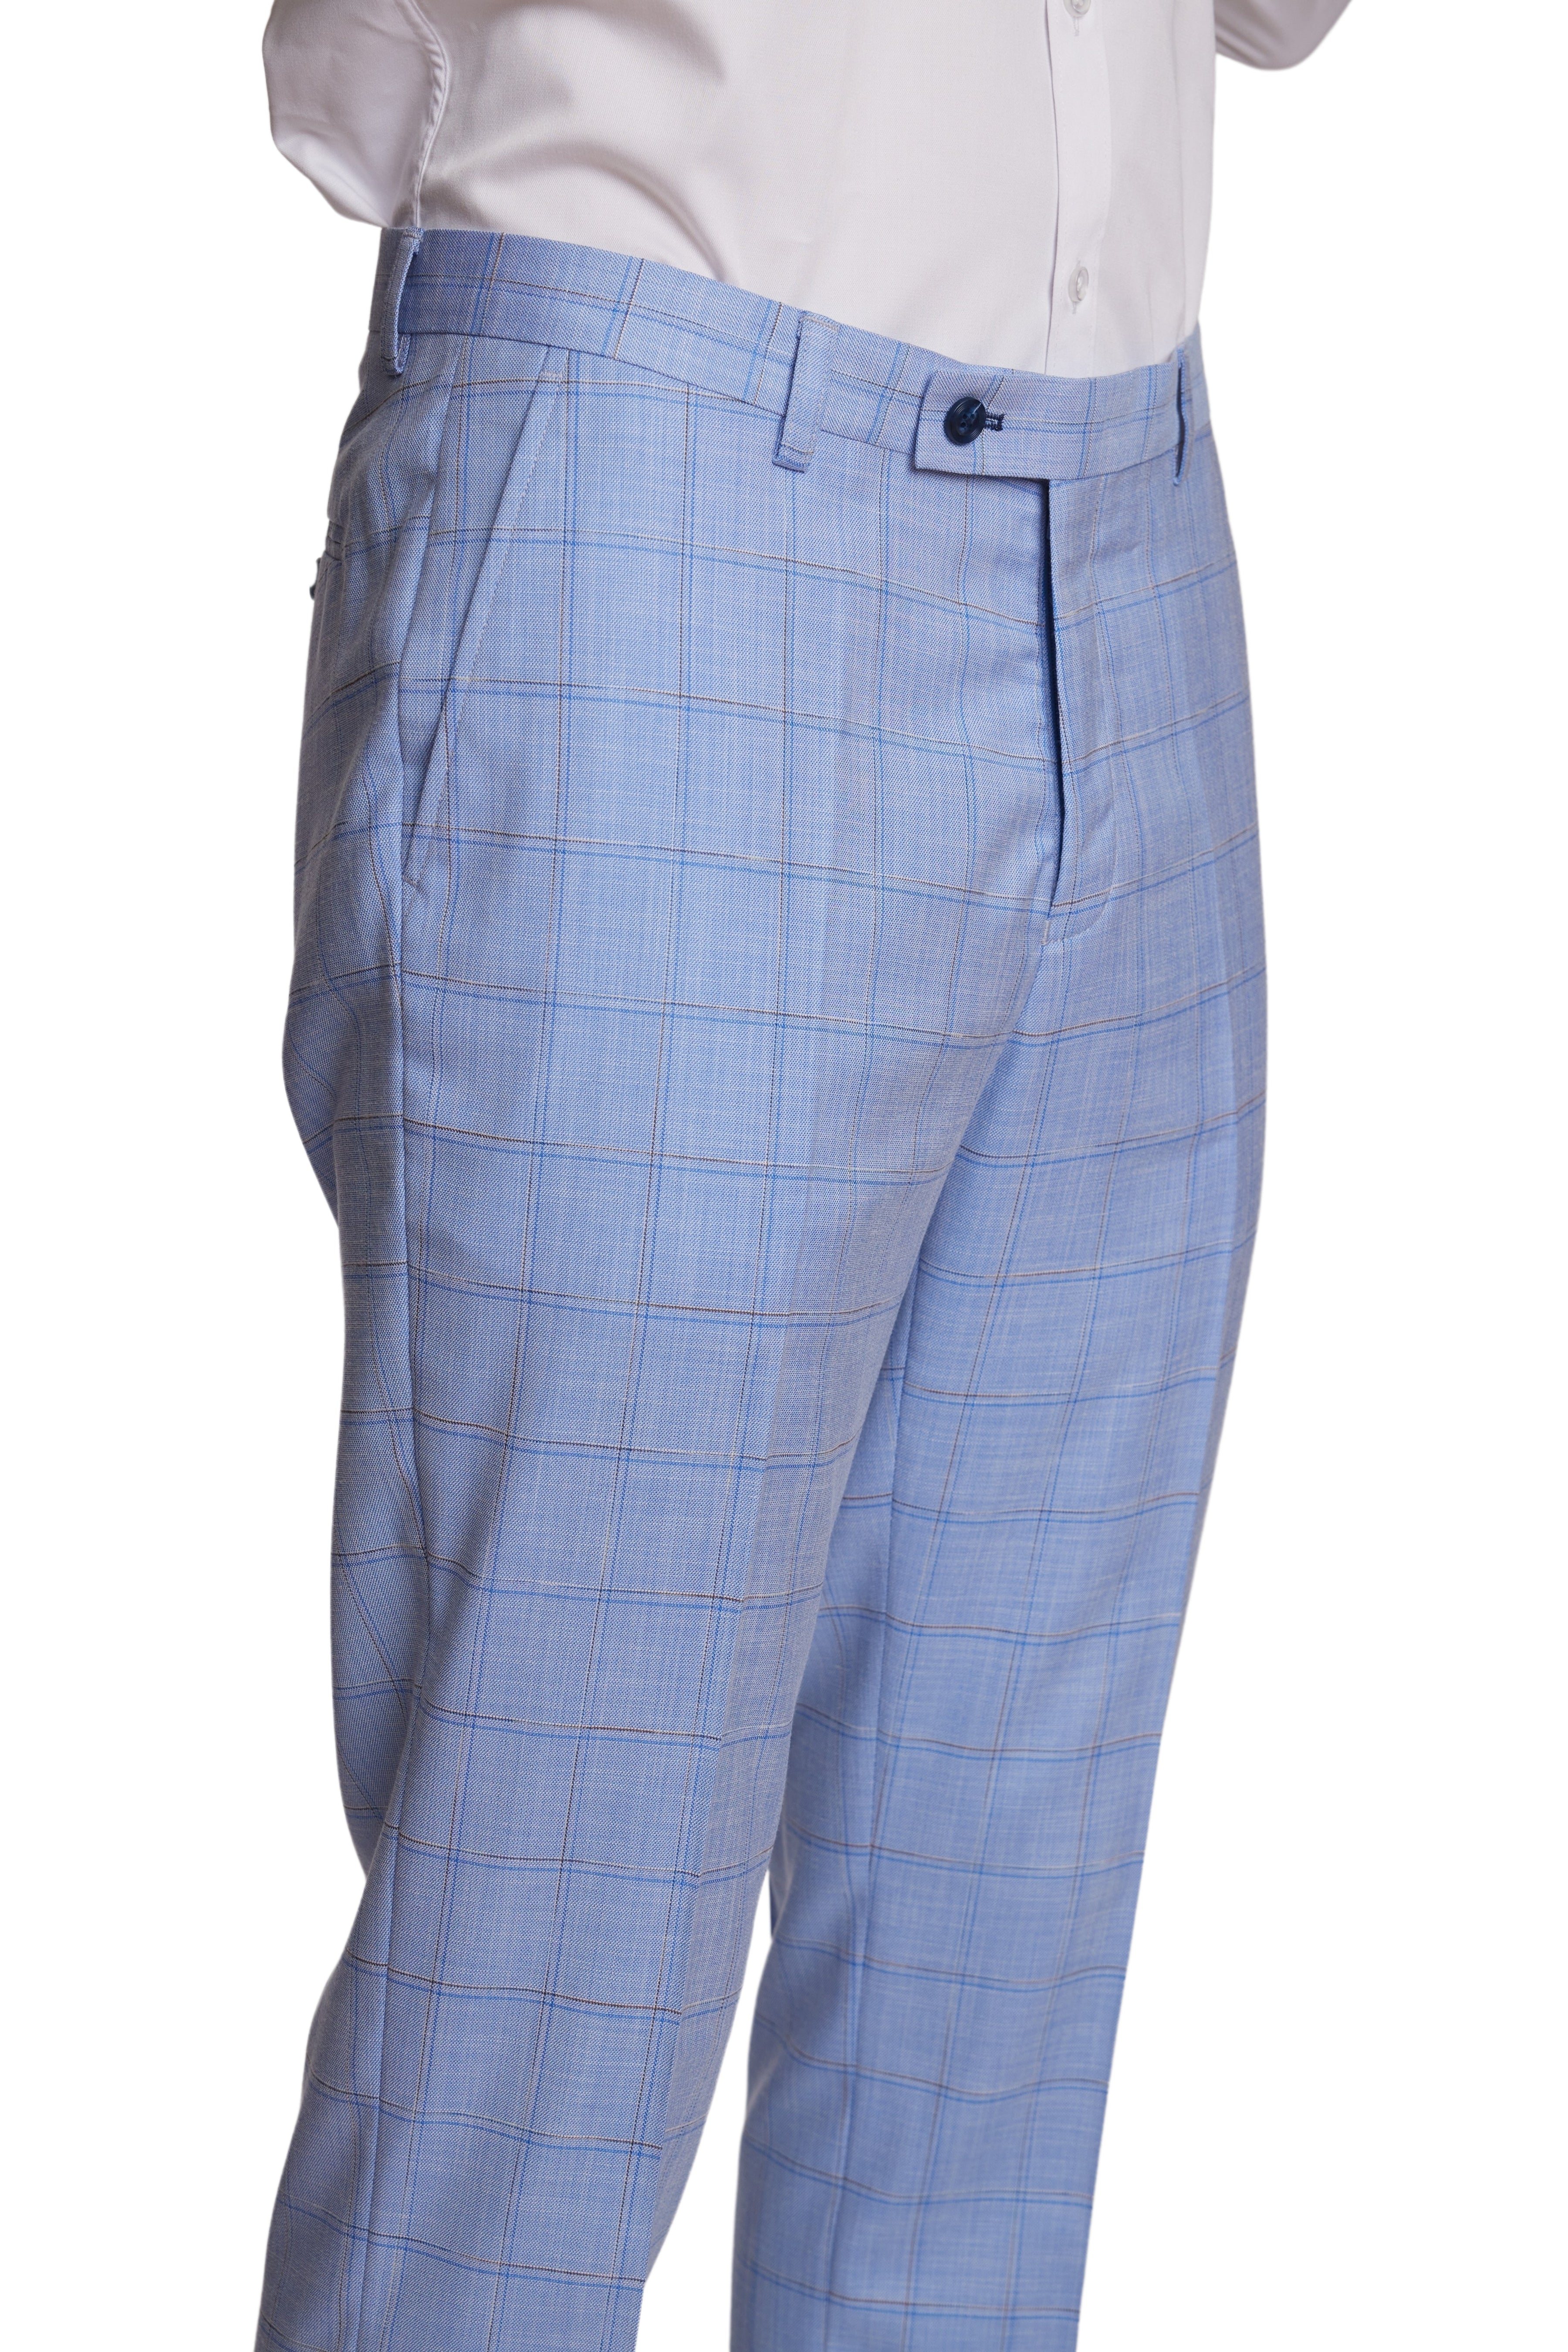 Big & Tall Downing Pants - Blue Double Check